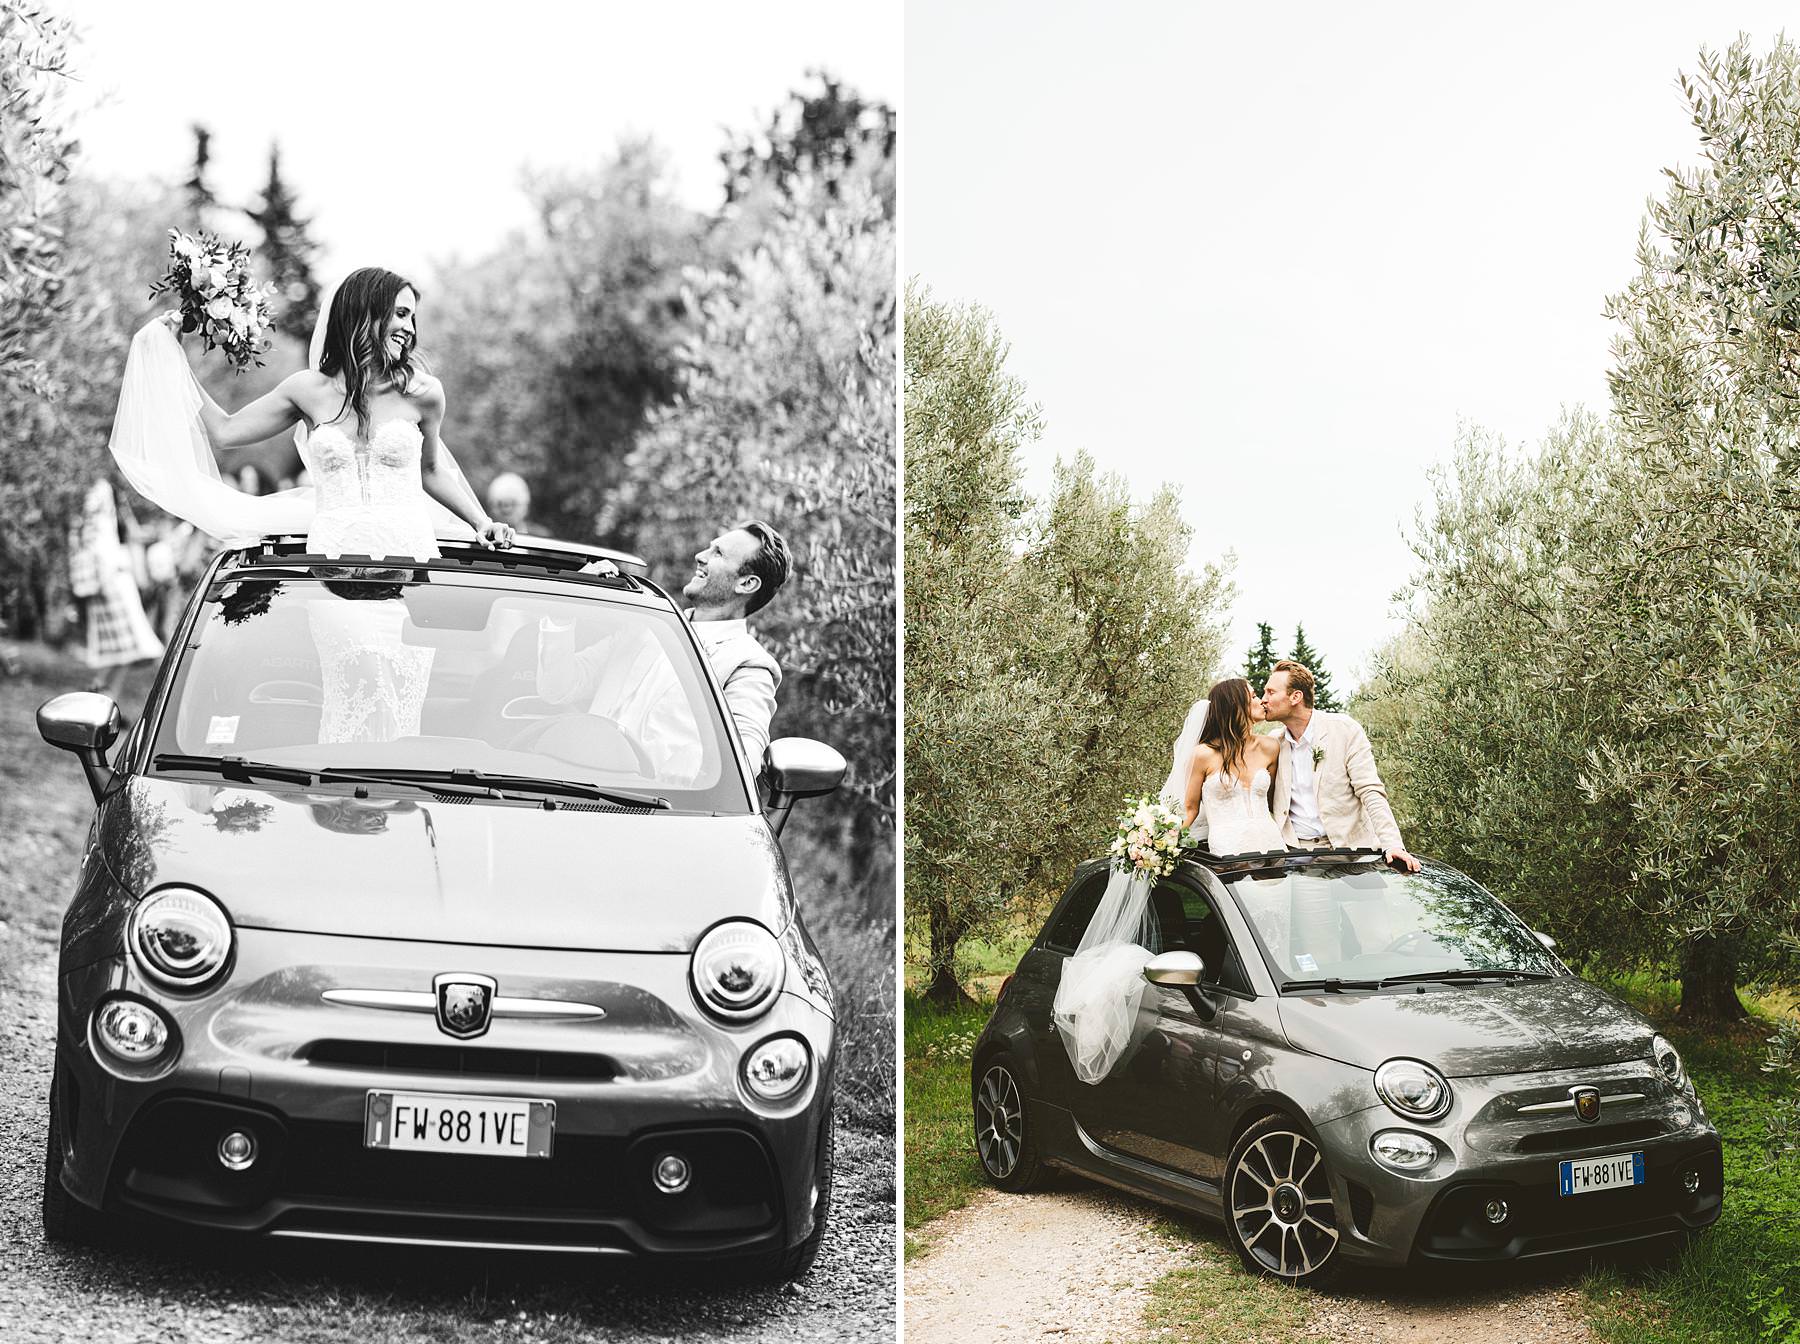 Bride and groom portrait with Fiat500 Abarth in the olive groves of Chianti near the historic residence of Villa Il Poggiale